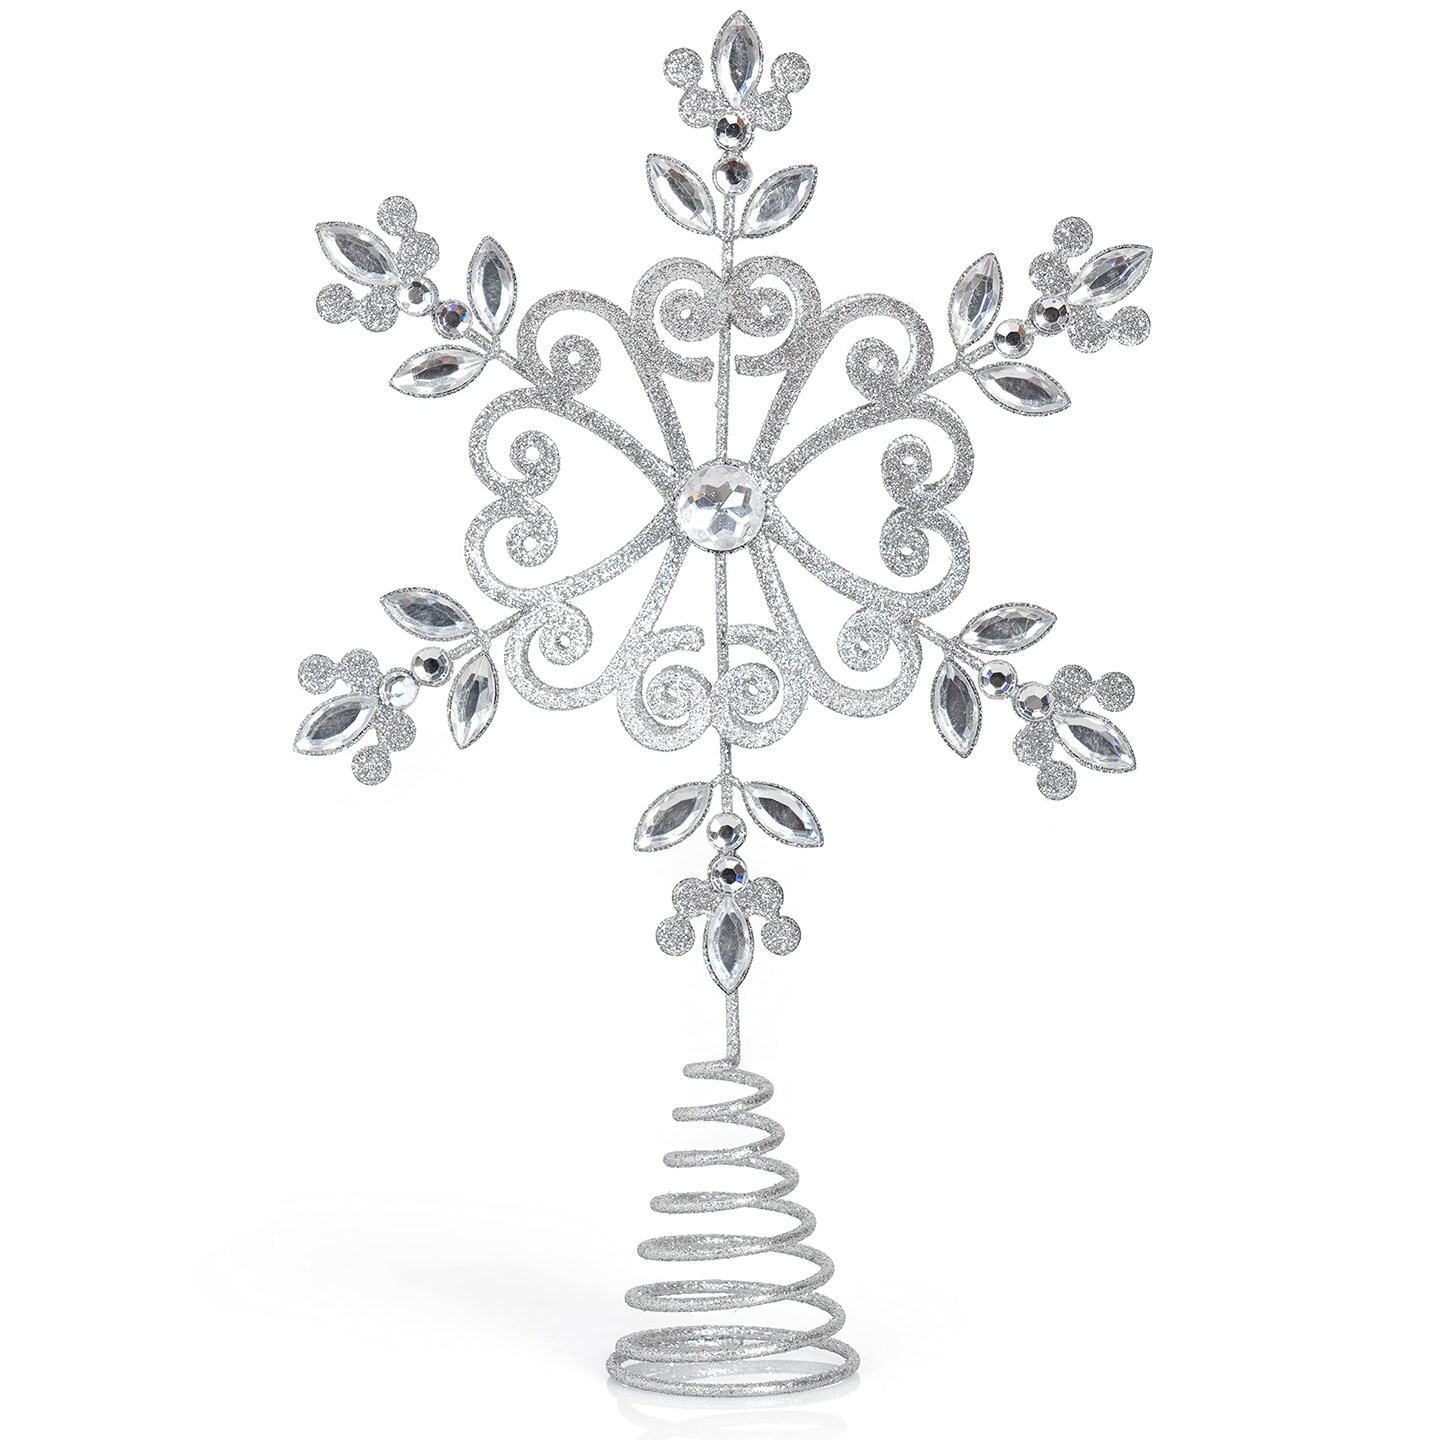 Ornativity Flower Snowflake Tree Topper &#x2013; Silver Glitter Intricate Designed Floral Snowflake Shaped Ornament with Sparkling Gem Detailed Christmas Star Tree Top Decorations